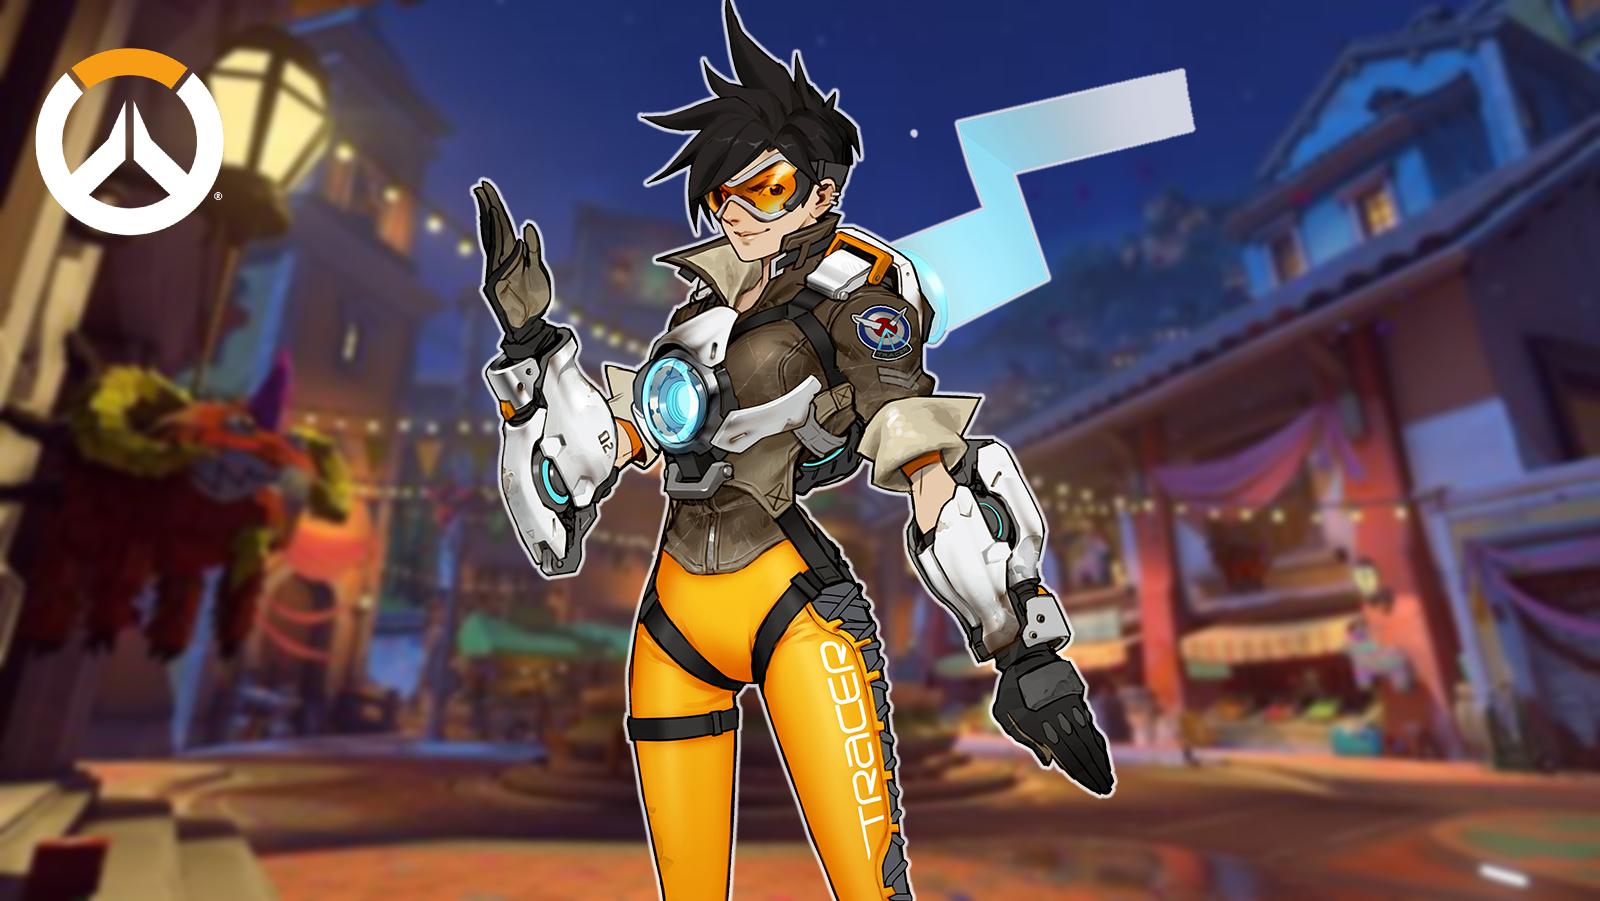 Overwatch Tracer Counters: 5 caracteres que podem contrariar o Tracer 🎮